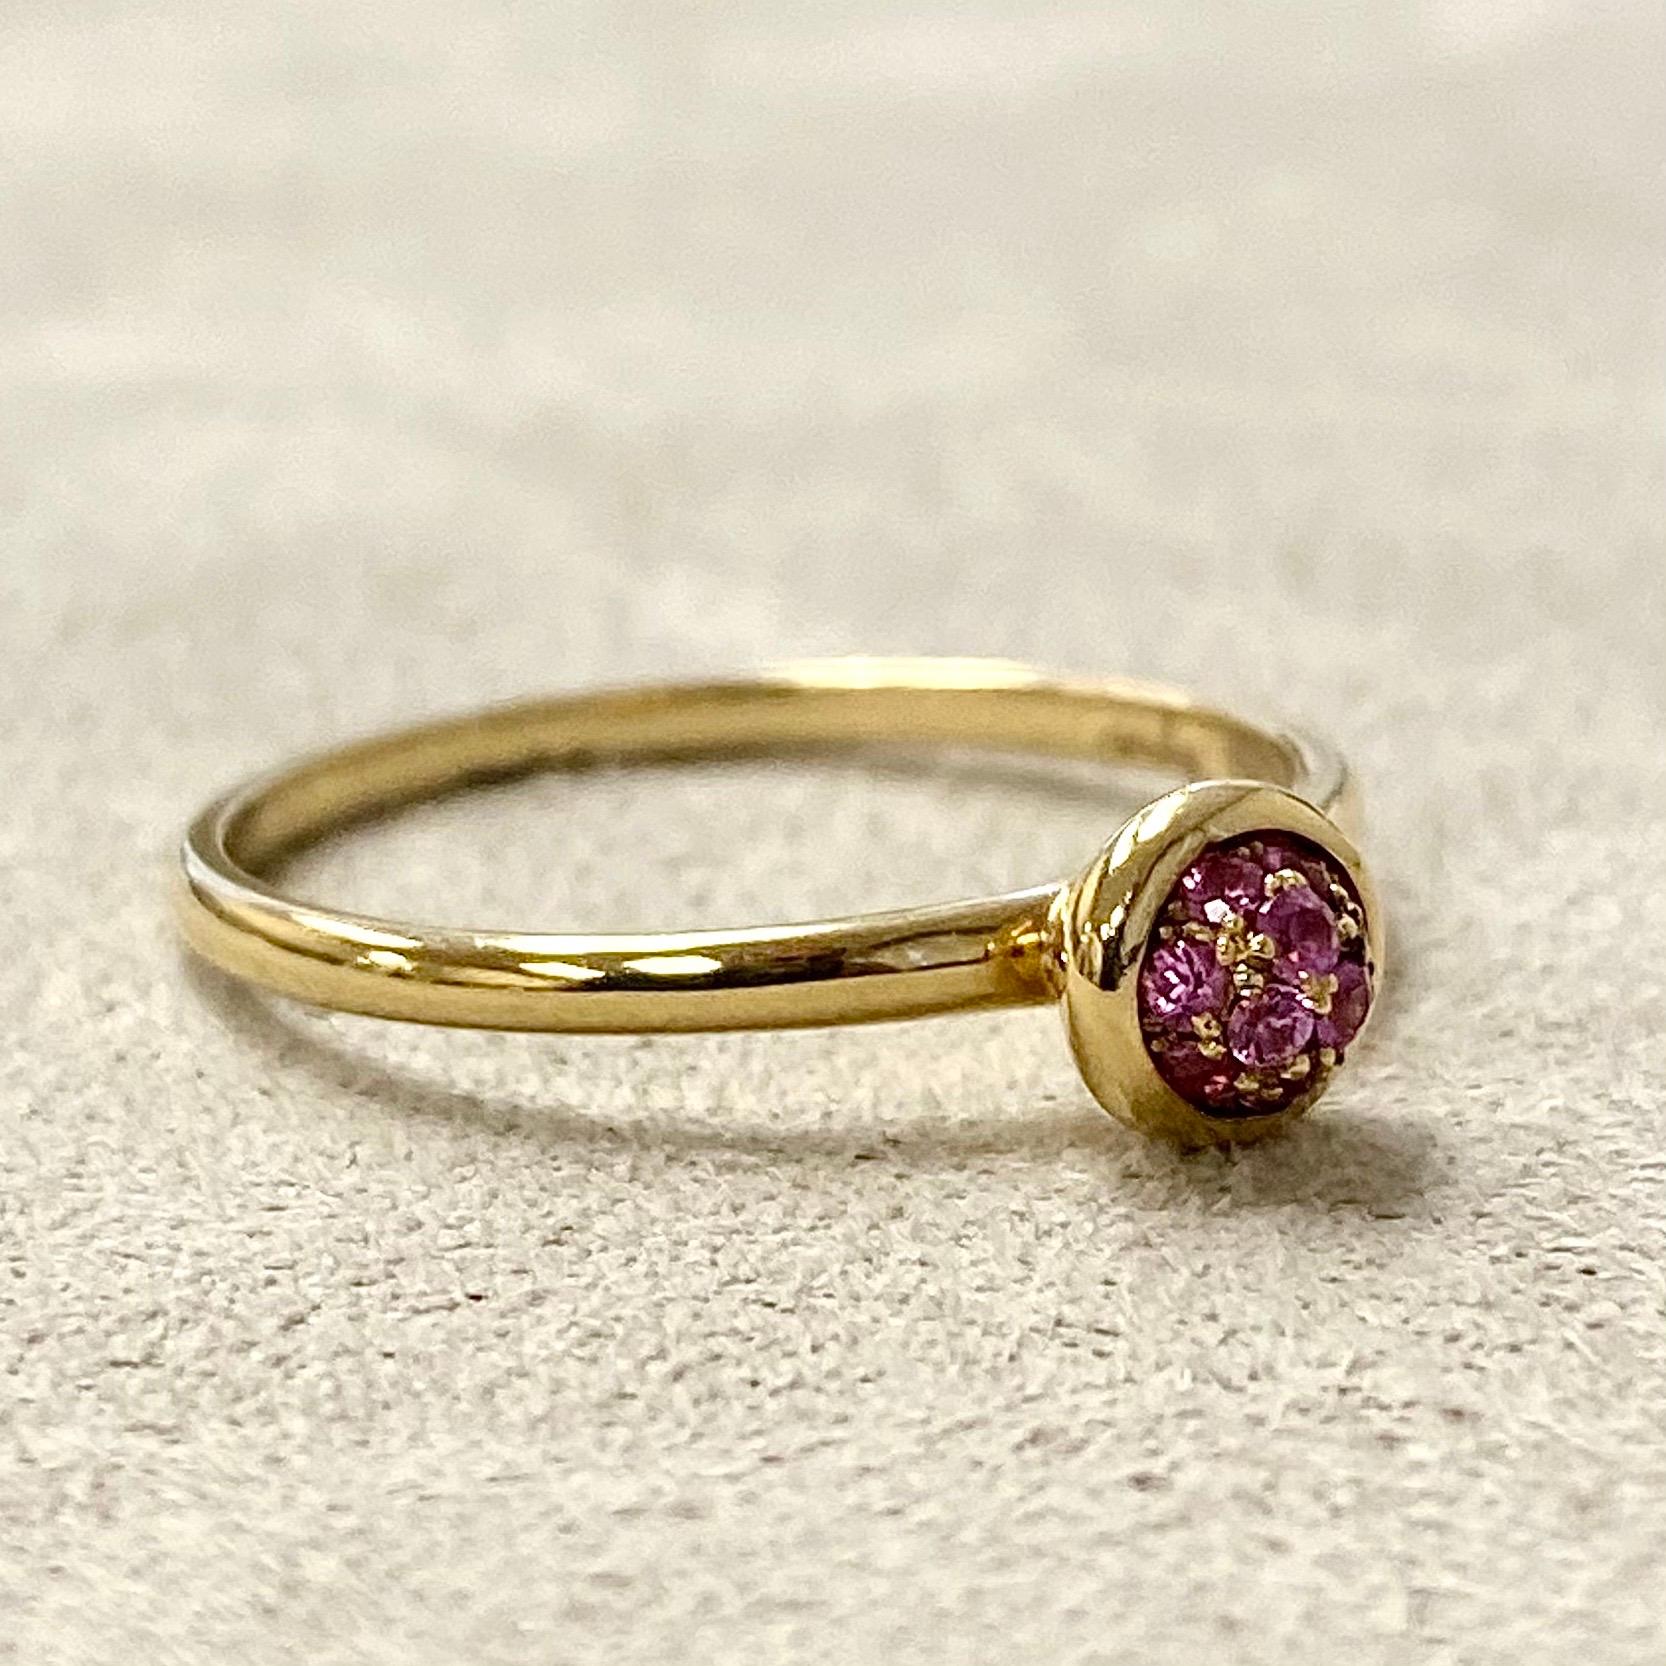 Created in 18 karat yellow gold
Pink sapphires 0.10 carat approx.
Pink sapphire pave ring 5 mm diameter approx.
Ring size US 6.5, can be sized upon request.

Crafted in 18 karat luminous yellow gold, this dazzling ring boasts 0.10 carats of